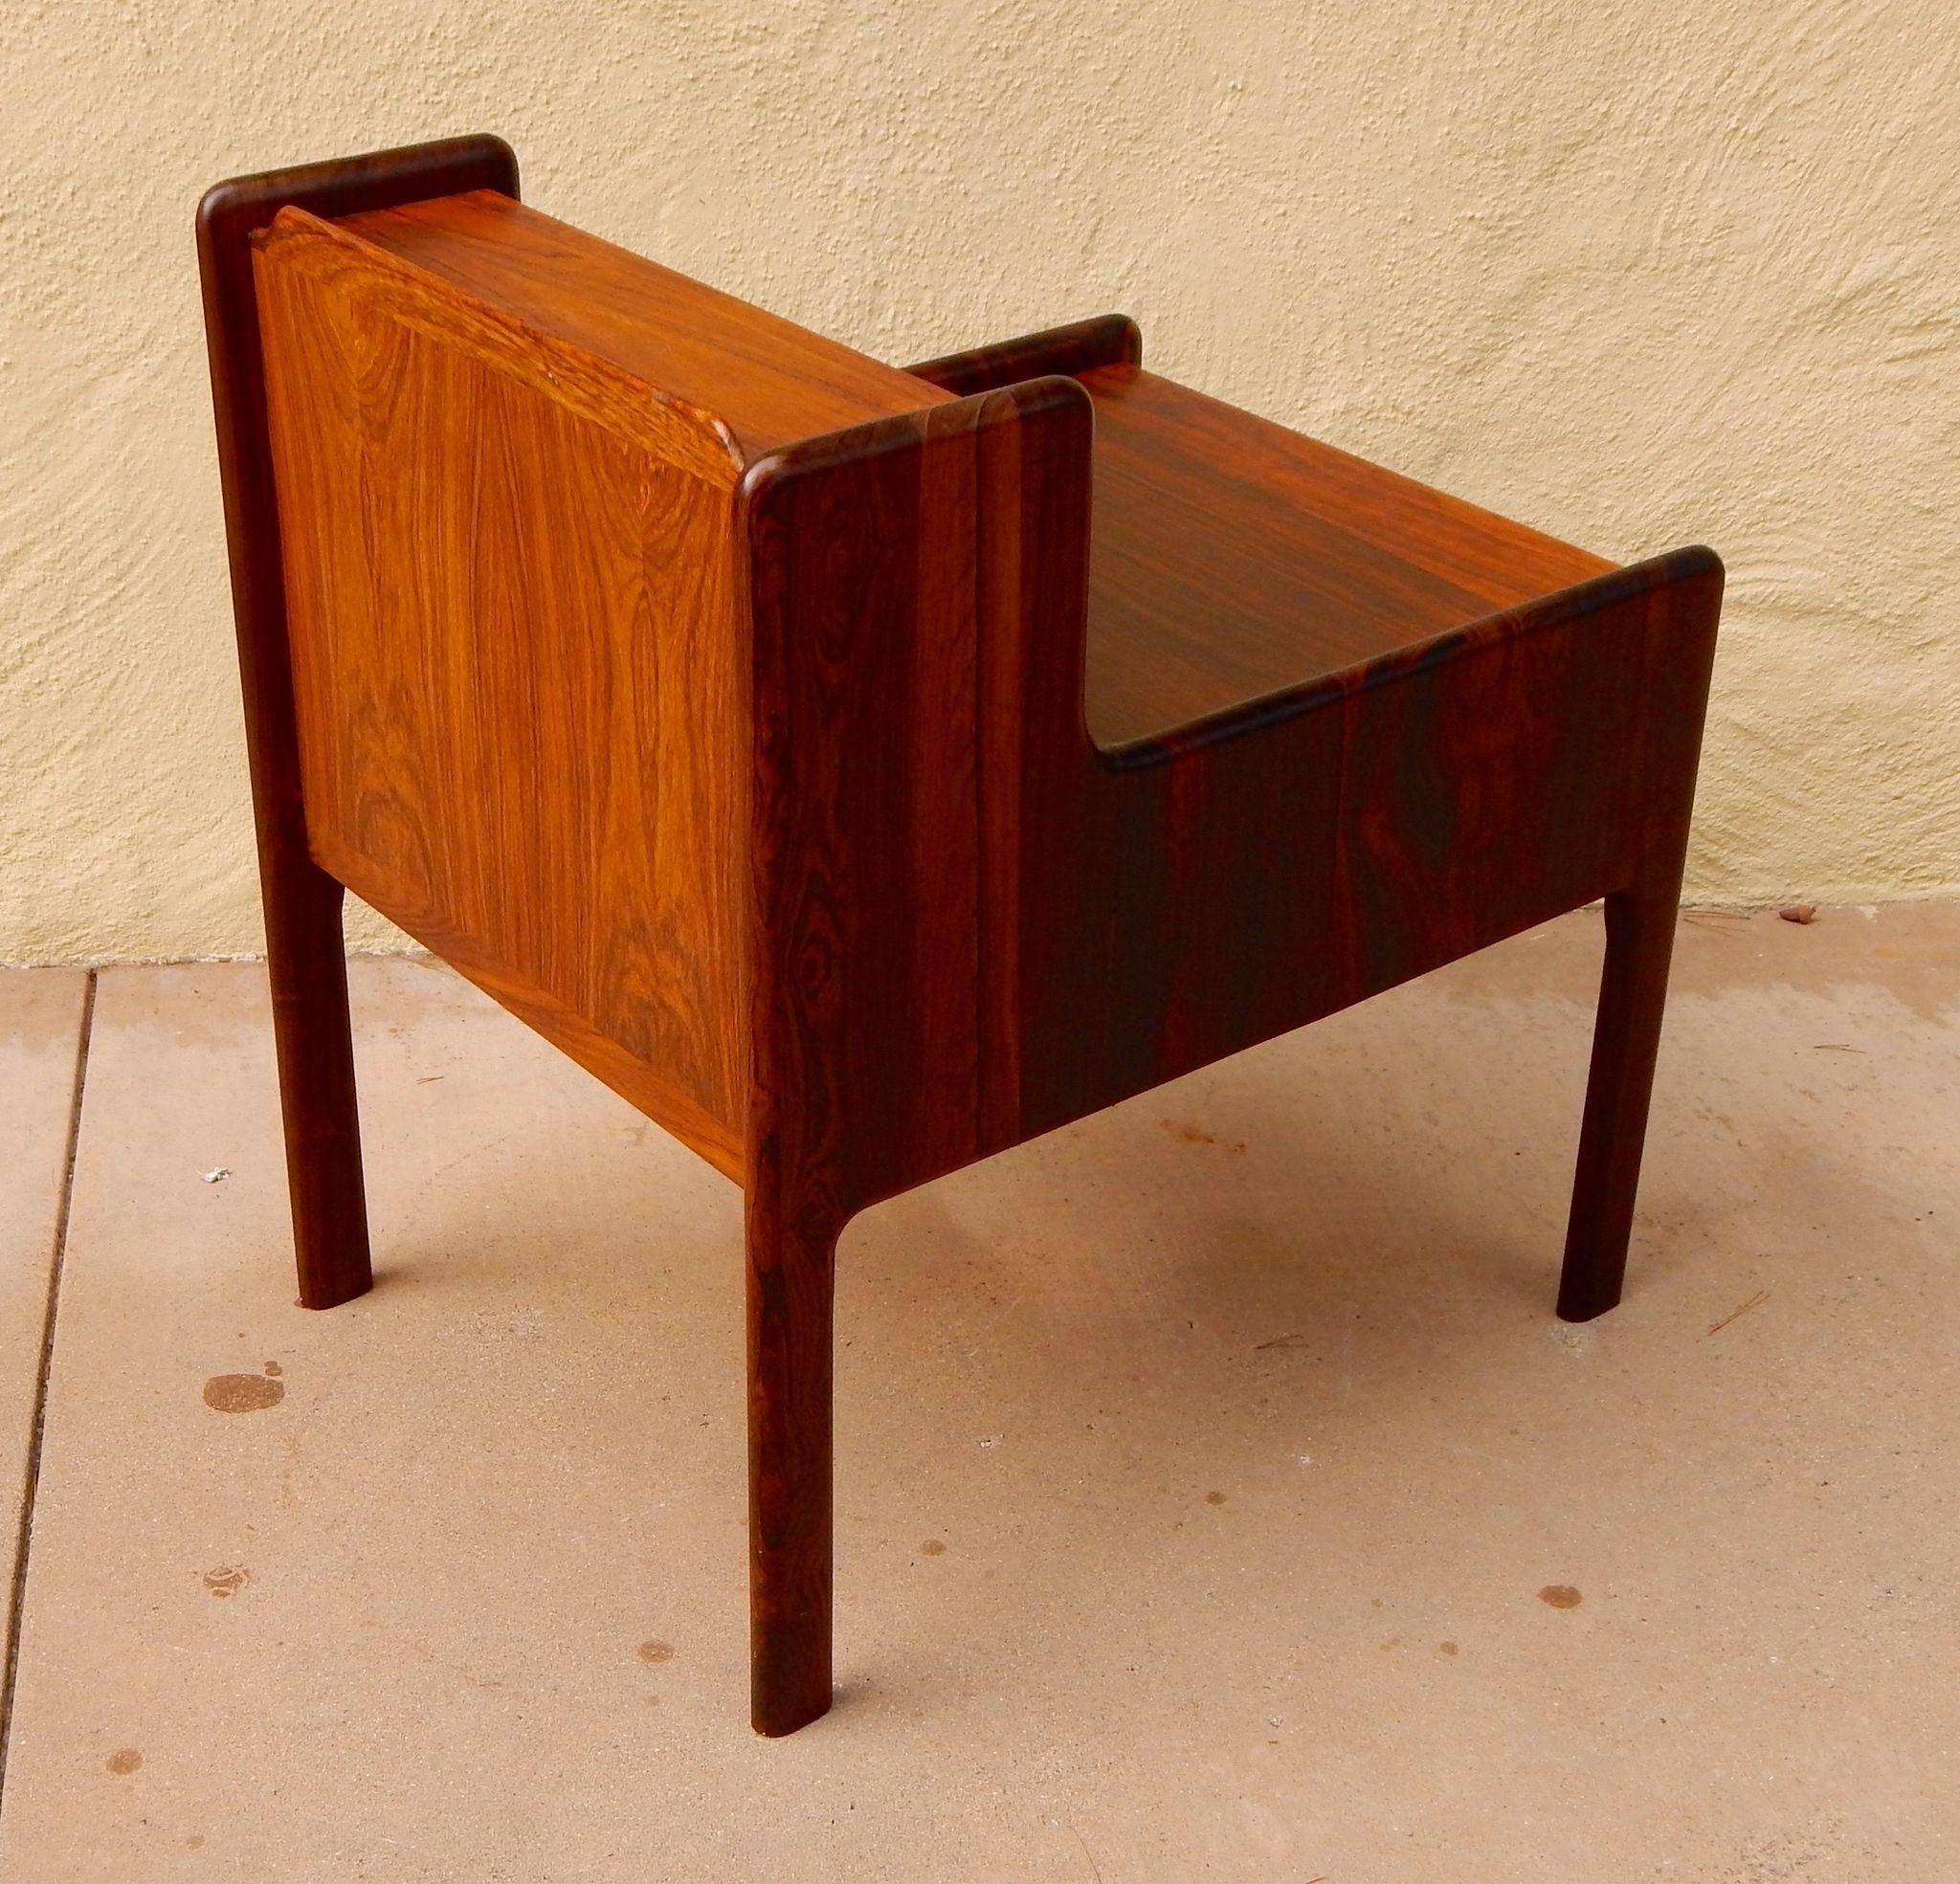 Mid-20th Century Danish Mid-Century Modern Rosewood Side Table, circa 1960 For Sale